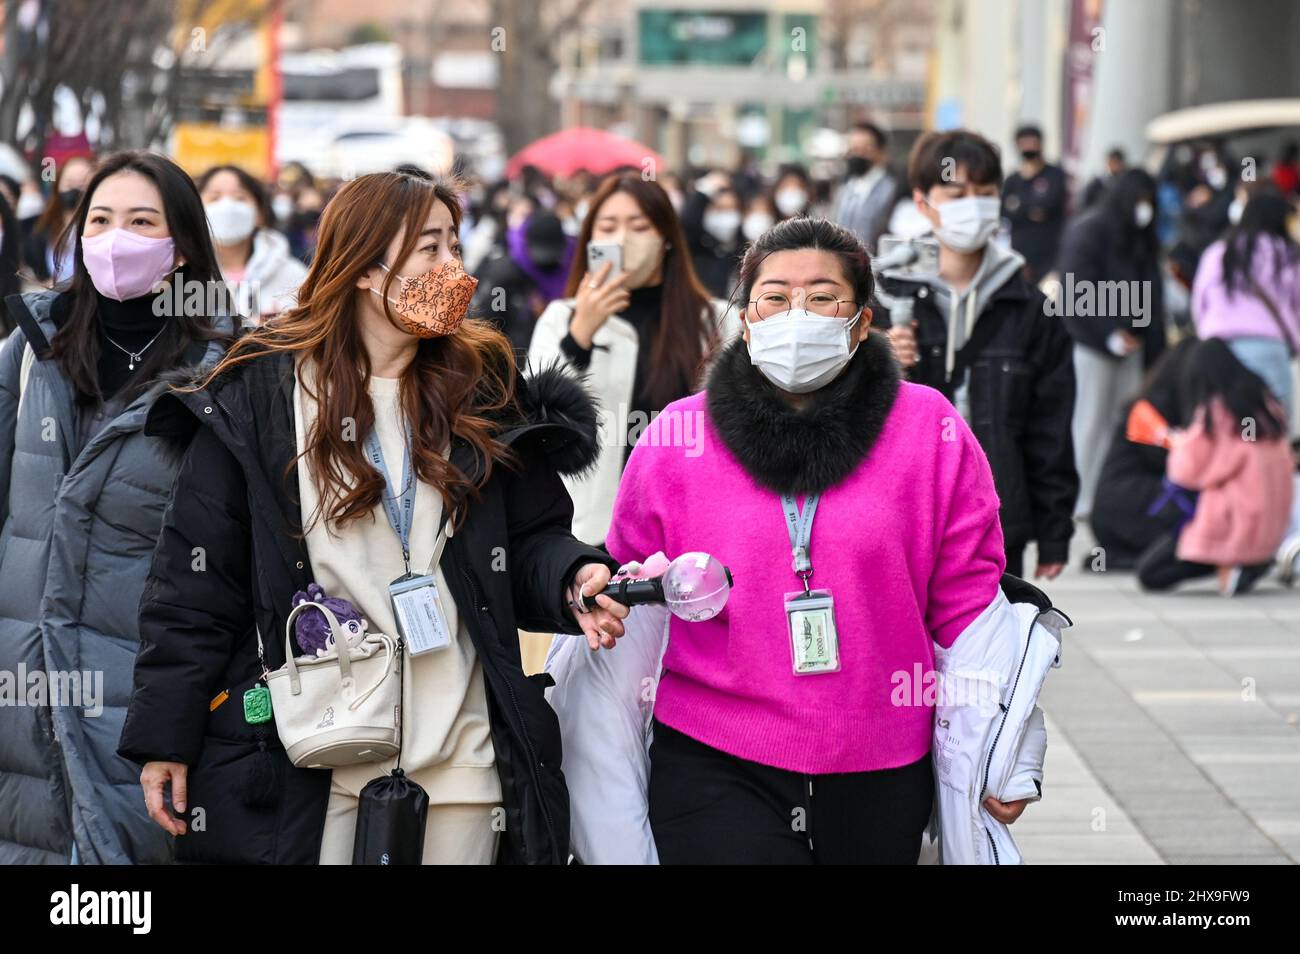 Seoul, South Korea. 10th Mar, 2022. Fans arrive for the BTS concert at Seoul National Stadium in Seoul, South Korea on Thursday, March 10, 2022. The show was the first time BTS, an all-male Korean pop band, has performed in front of a local audience since 2019. Photo by Thomas Maresca/UPI Credit: UPI/Alamy Live News Stock Photo